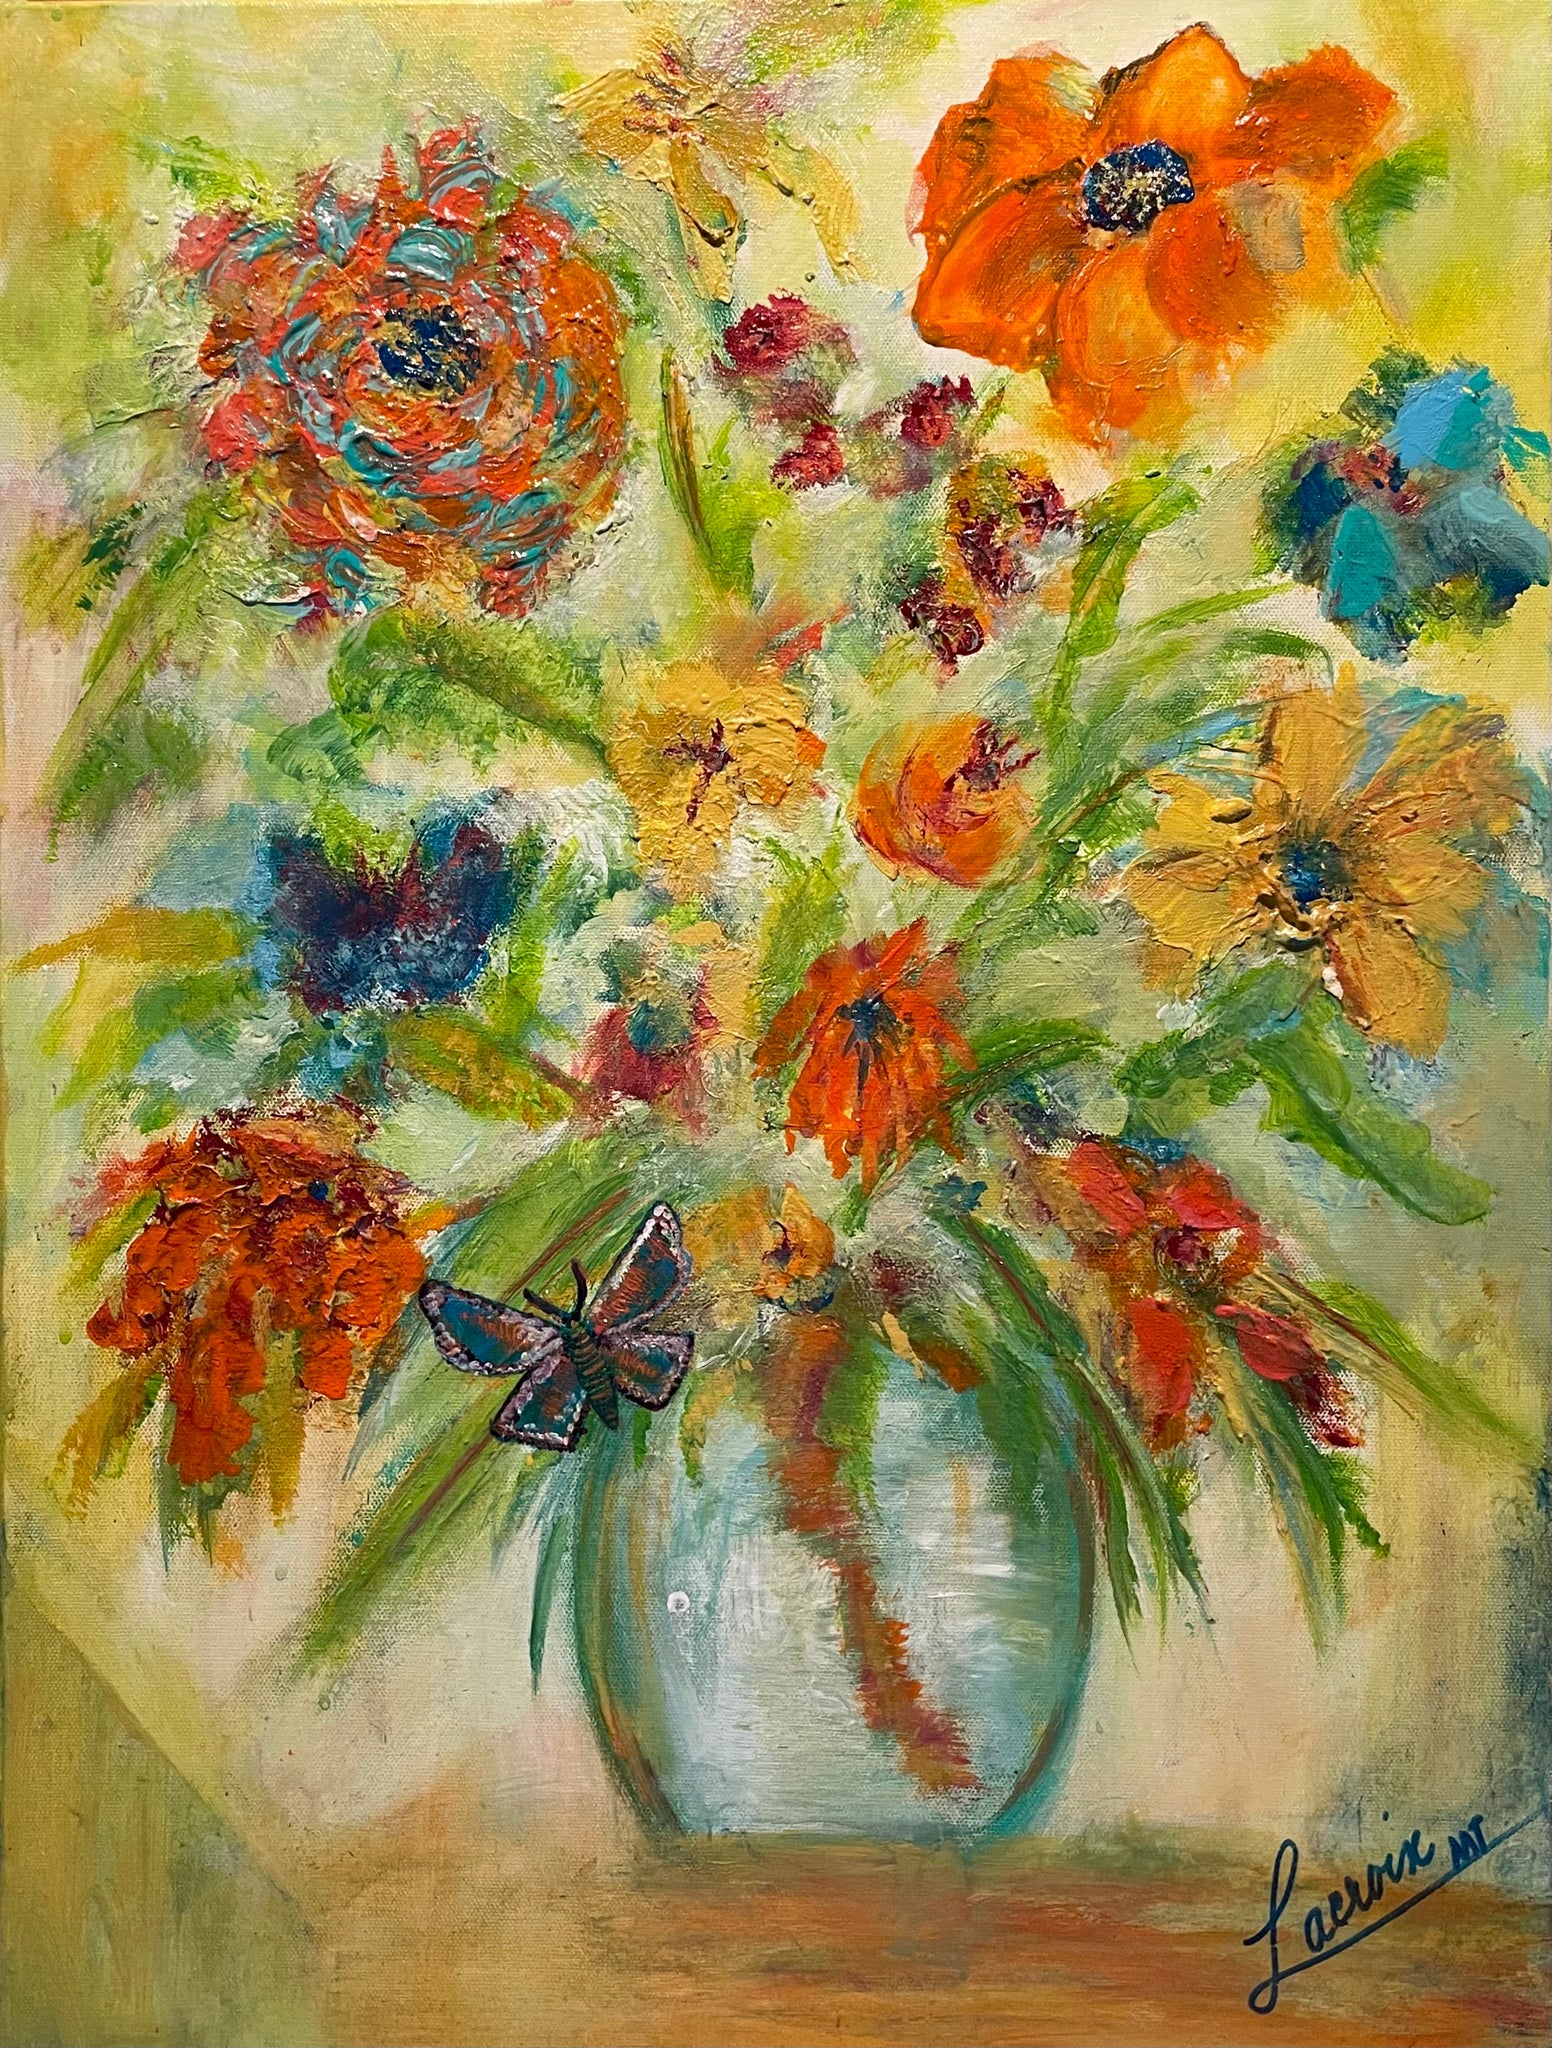 Butterfly and Flowers - Original Painting - 18x24 Canvas